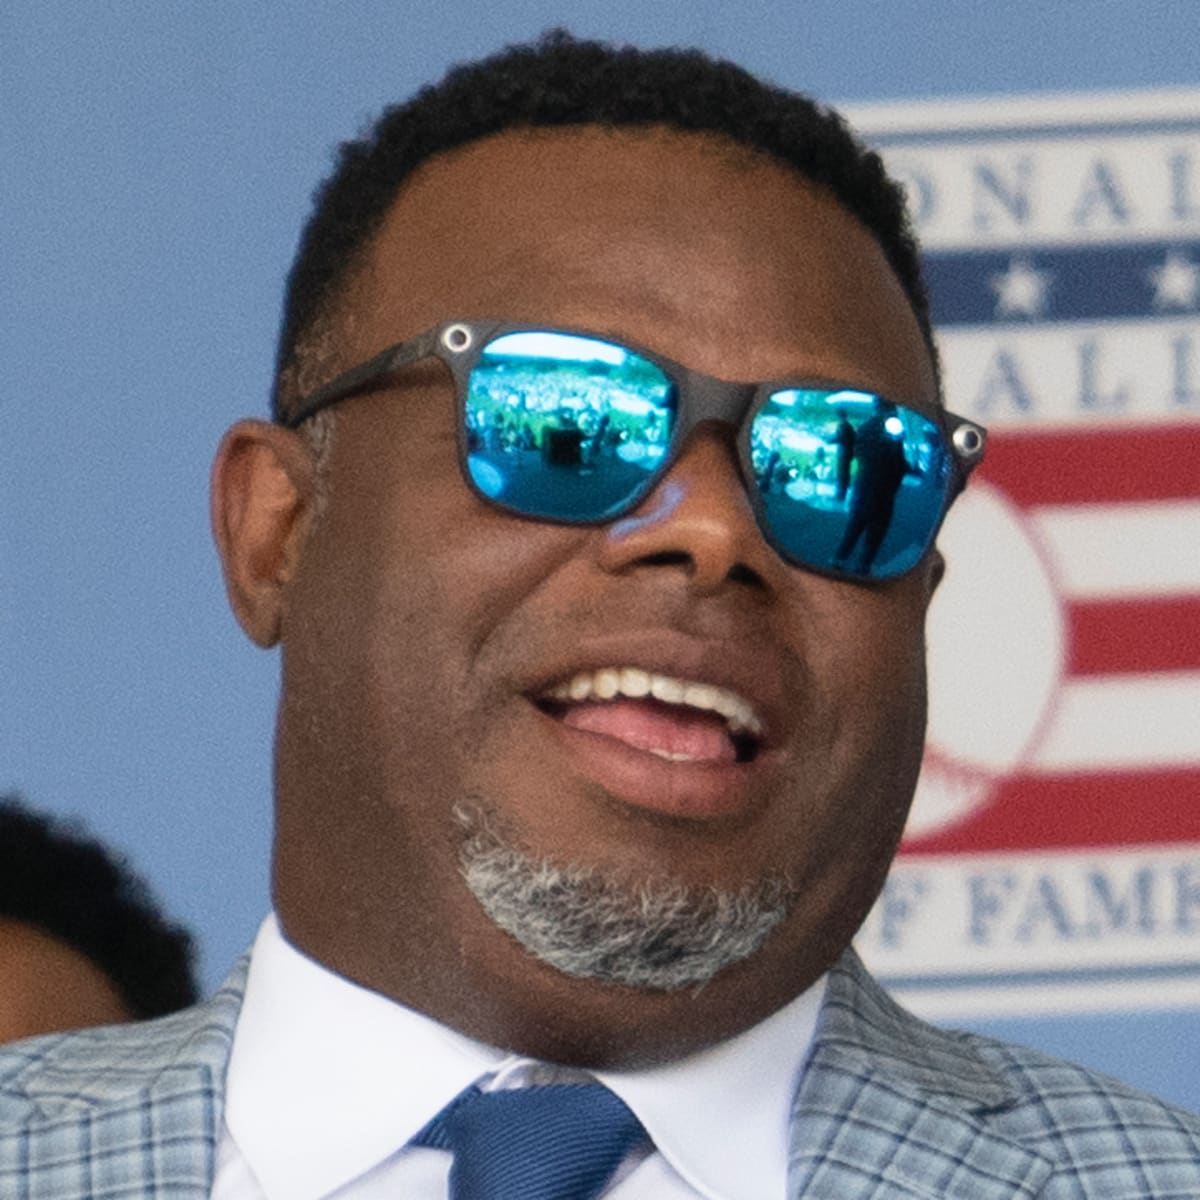 Ken Griffey Jr. will be Team USA's hitting coach for the 2023